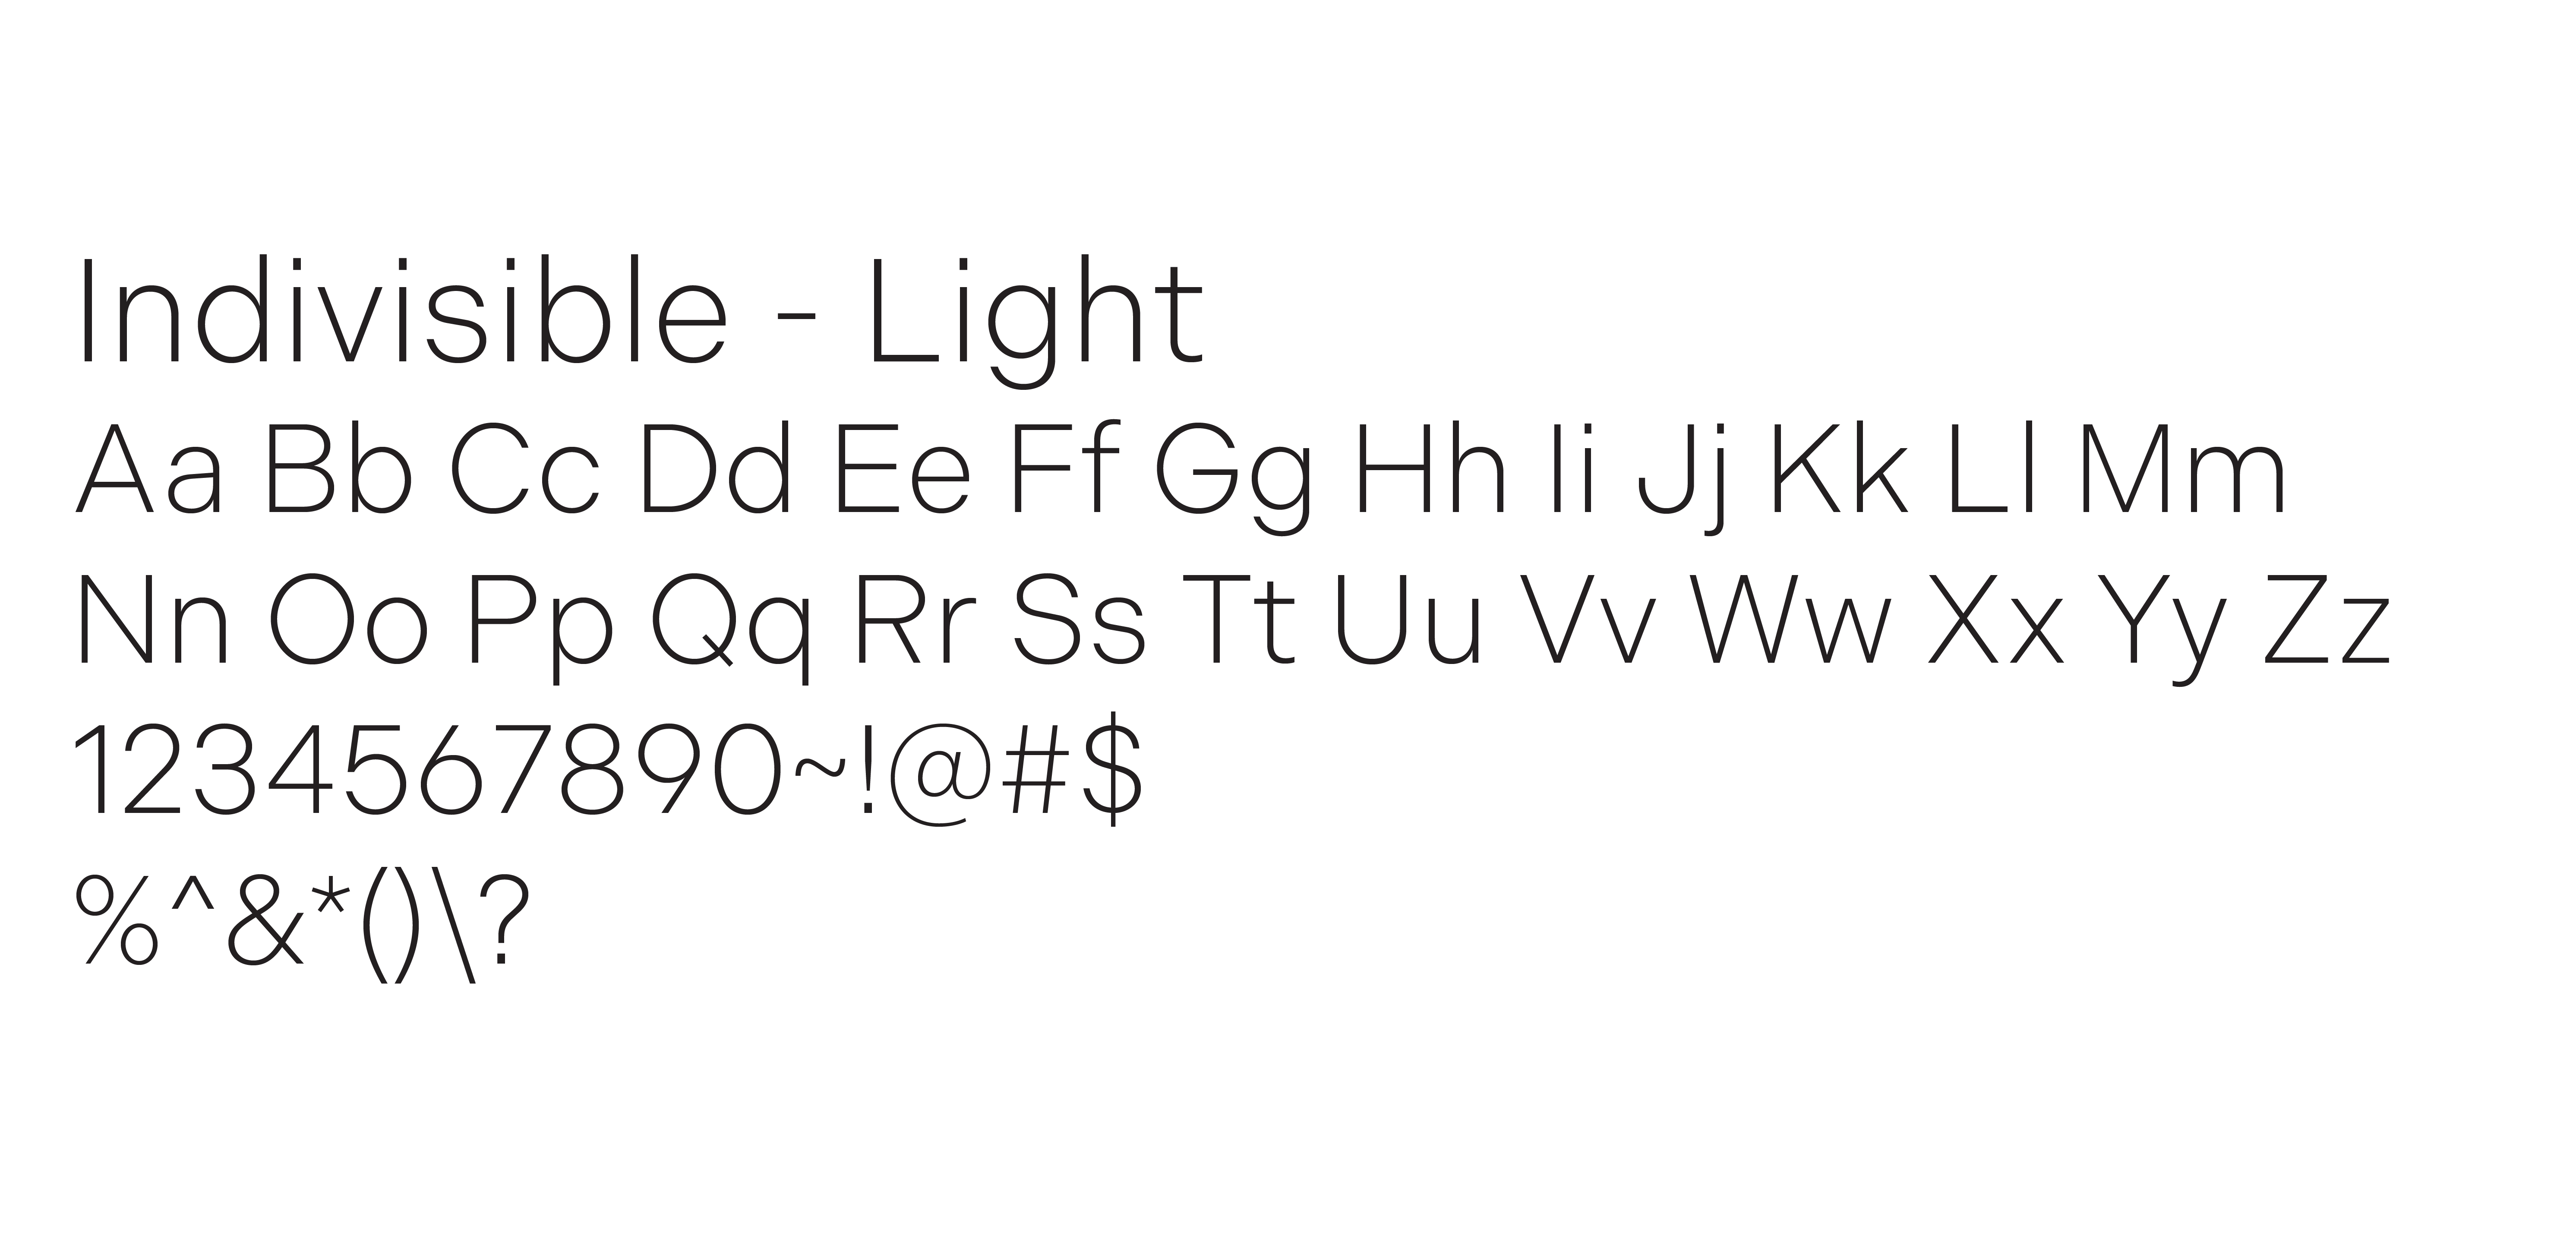 Type Study for Allied Health, Sport & Wellness: Indivisible Light